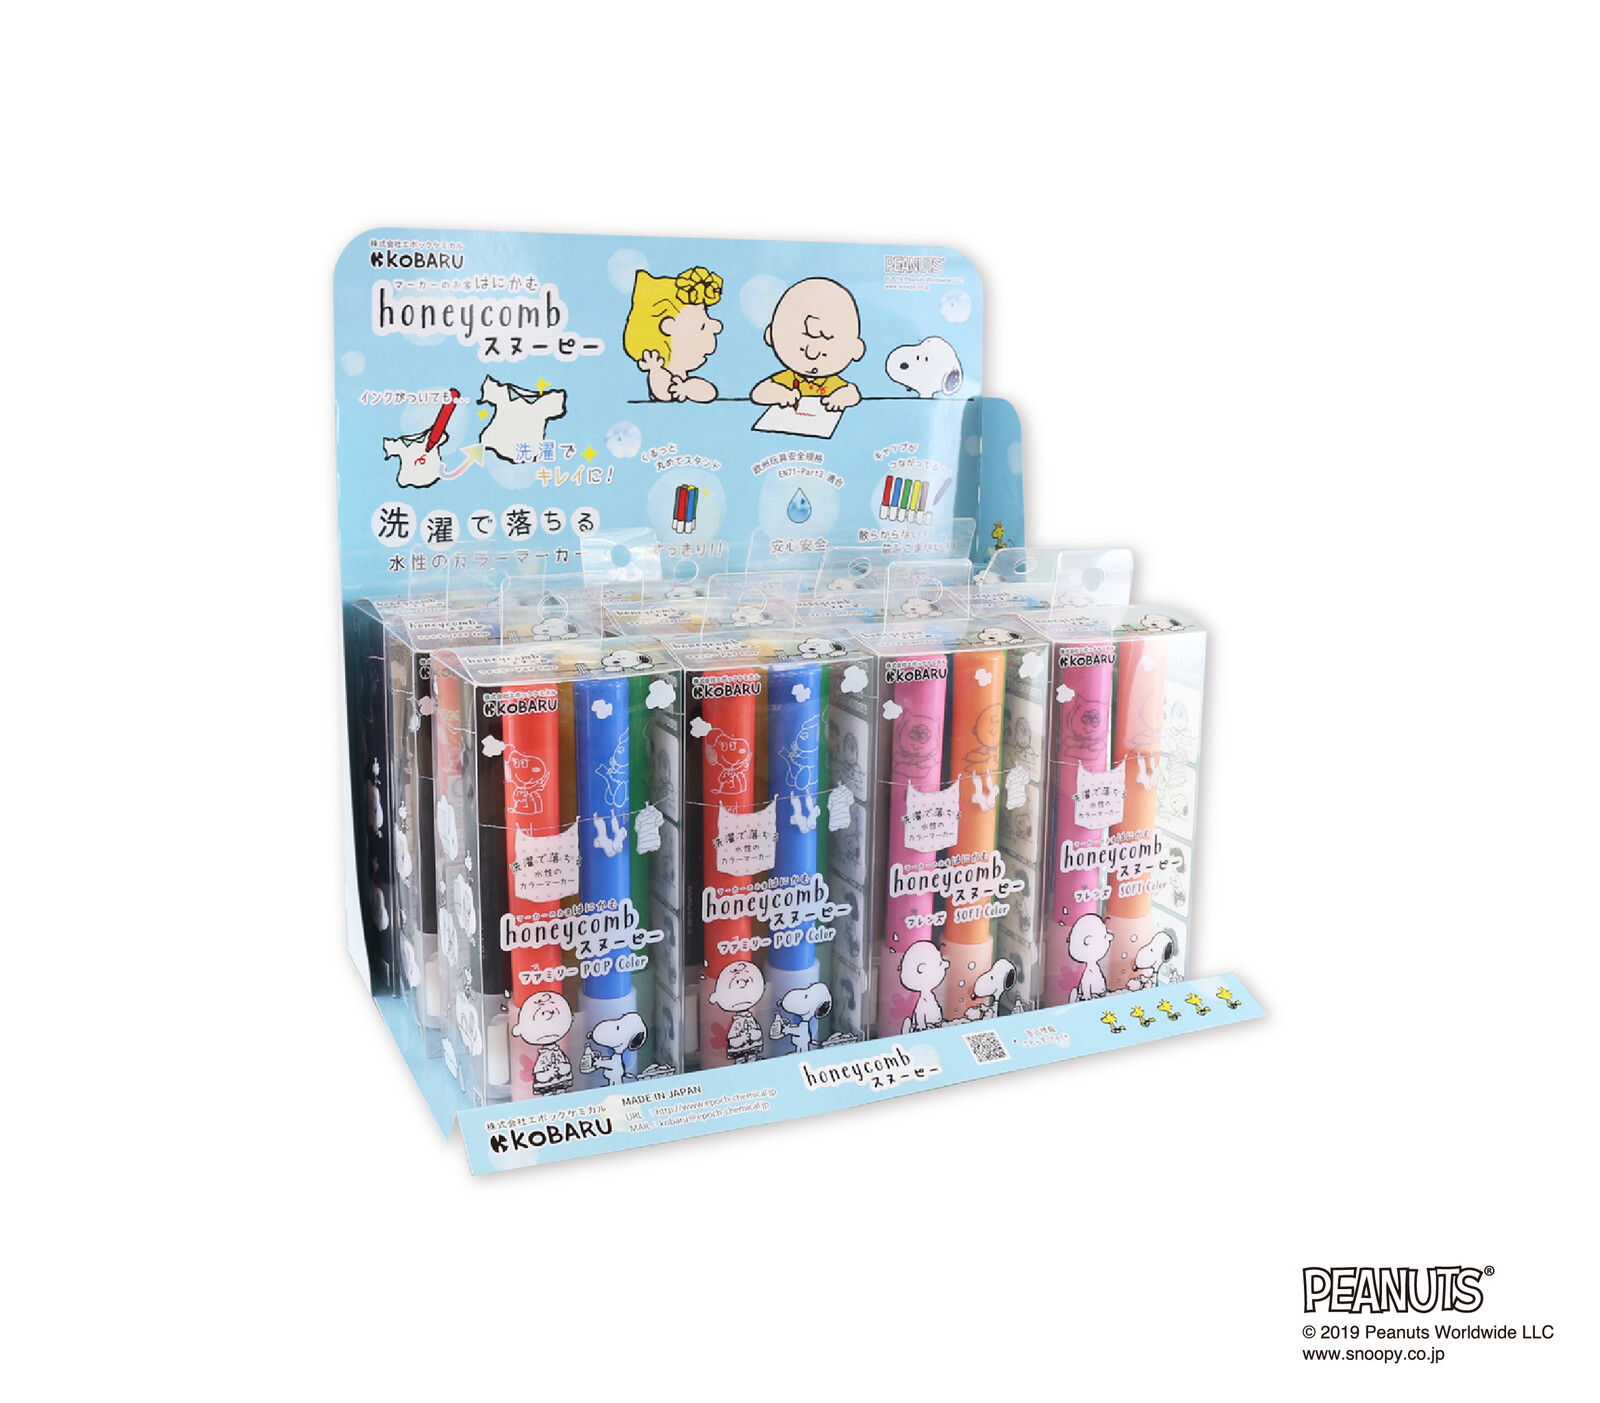 Snoopy Pen Set Export Japanese Products To The World At